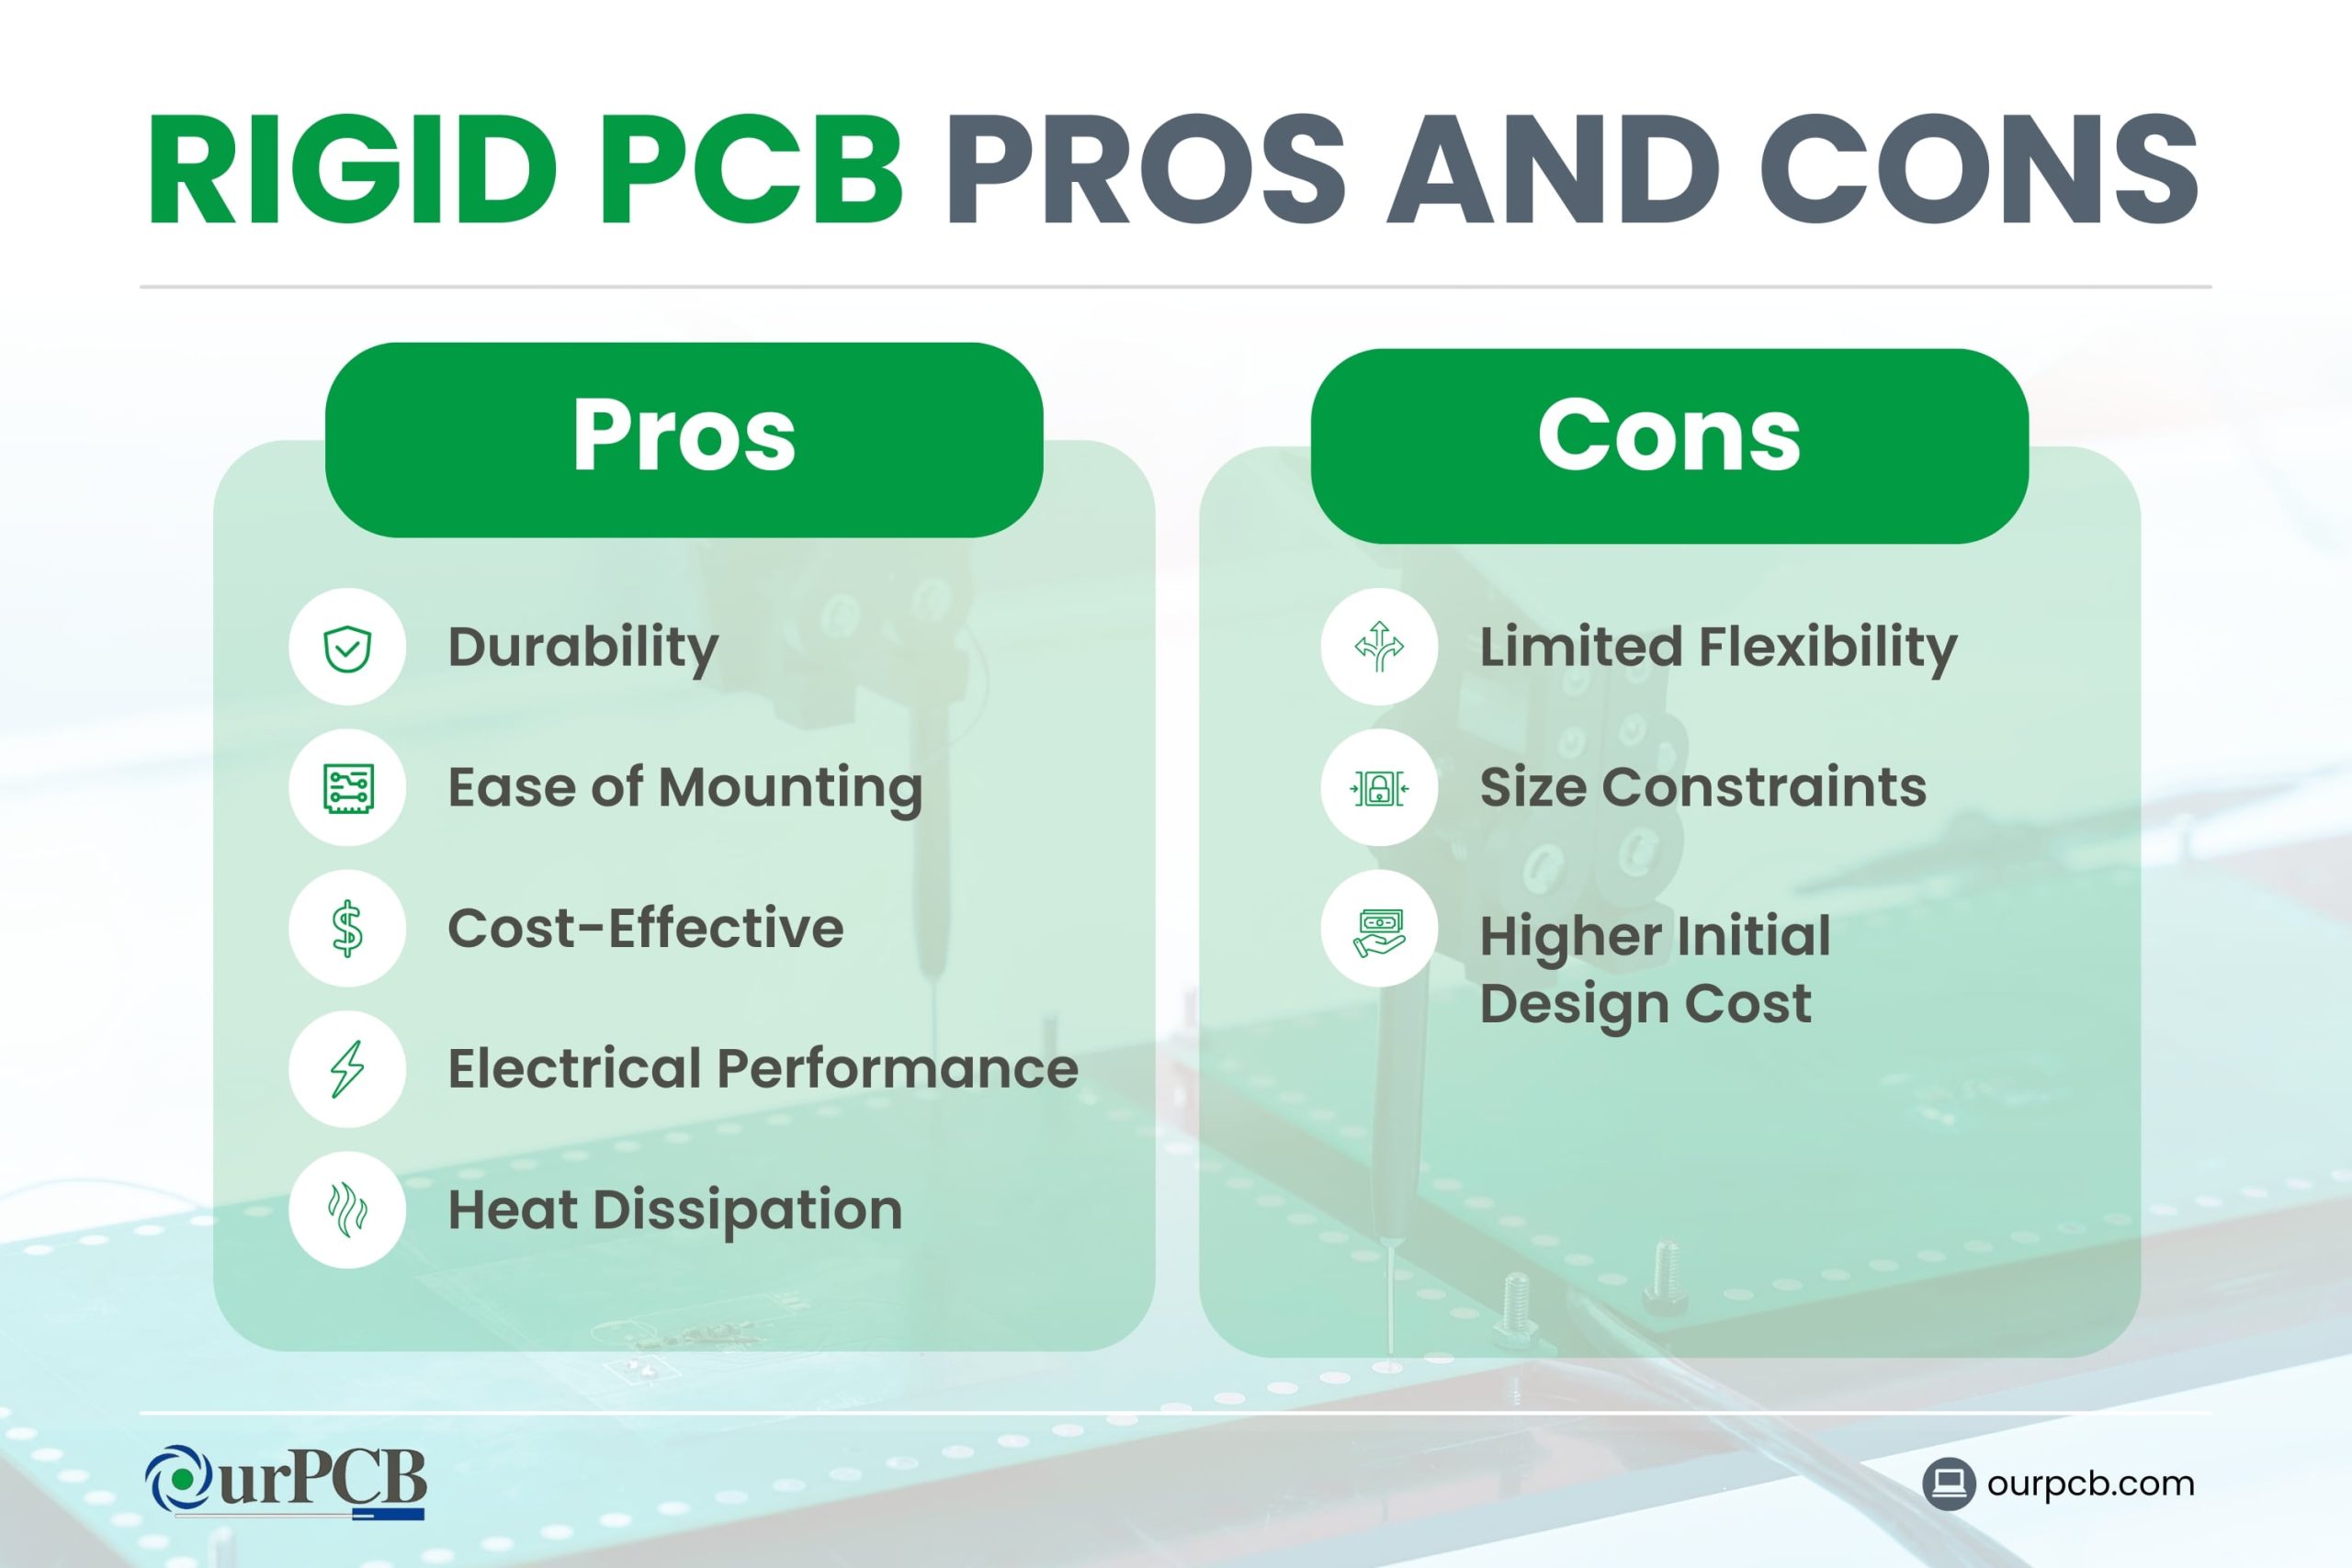 Pros and Cons of Rigid PCBs